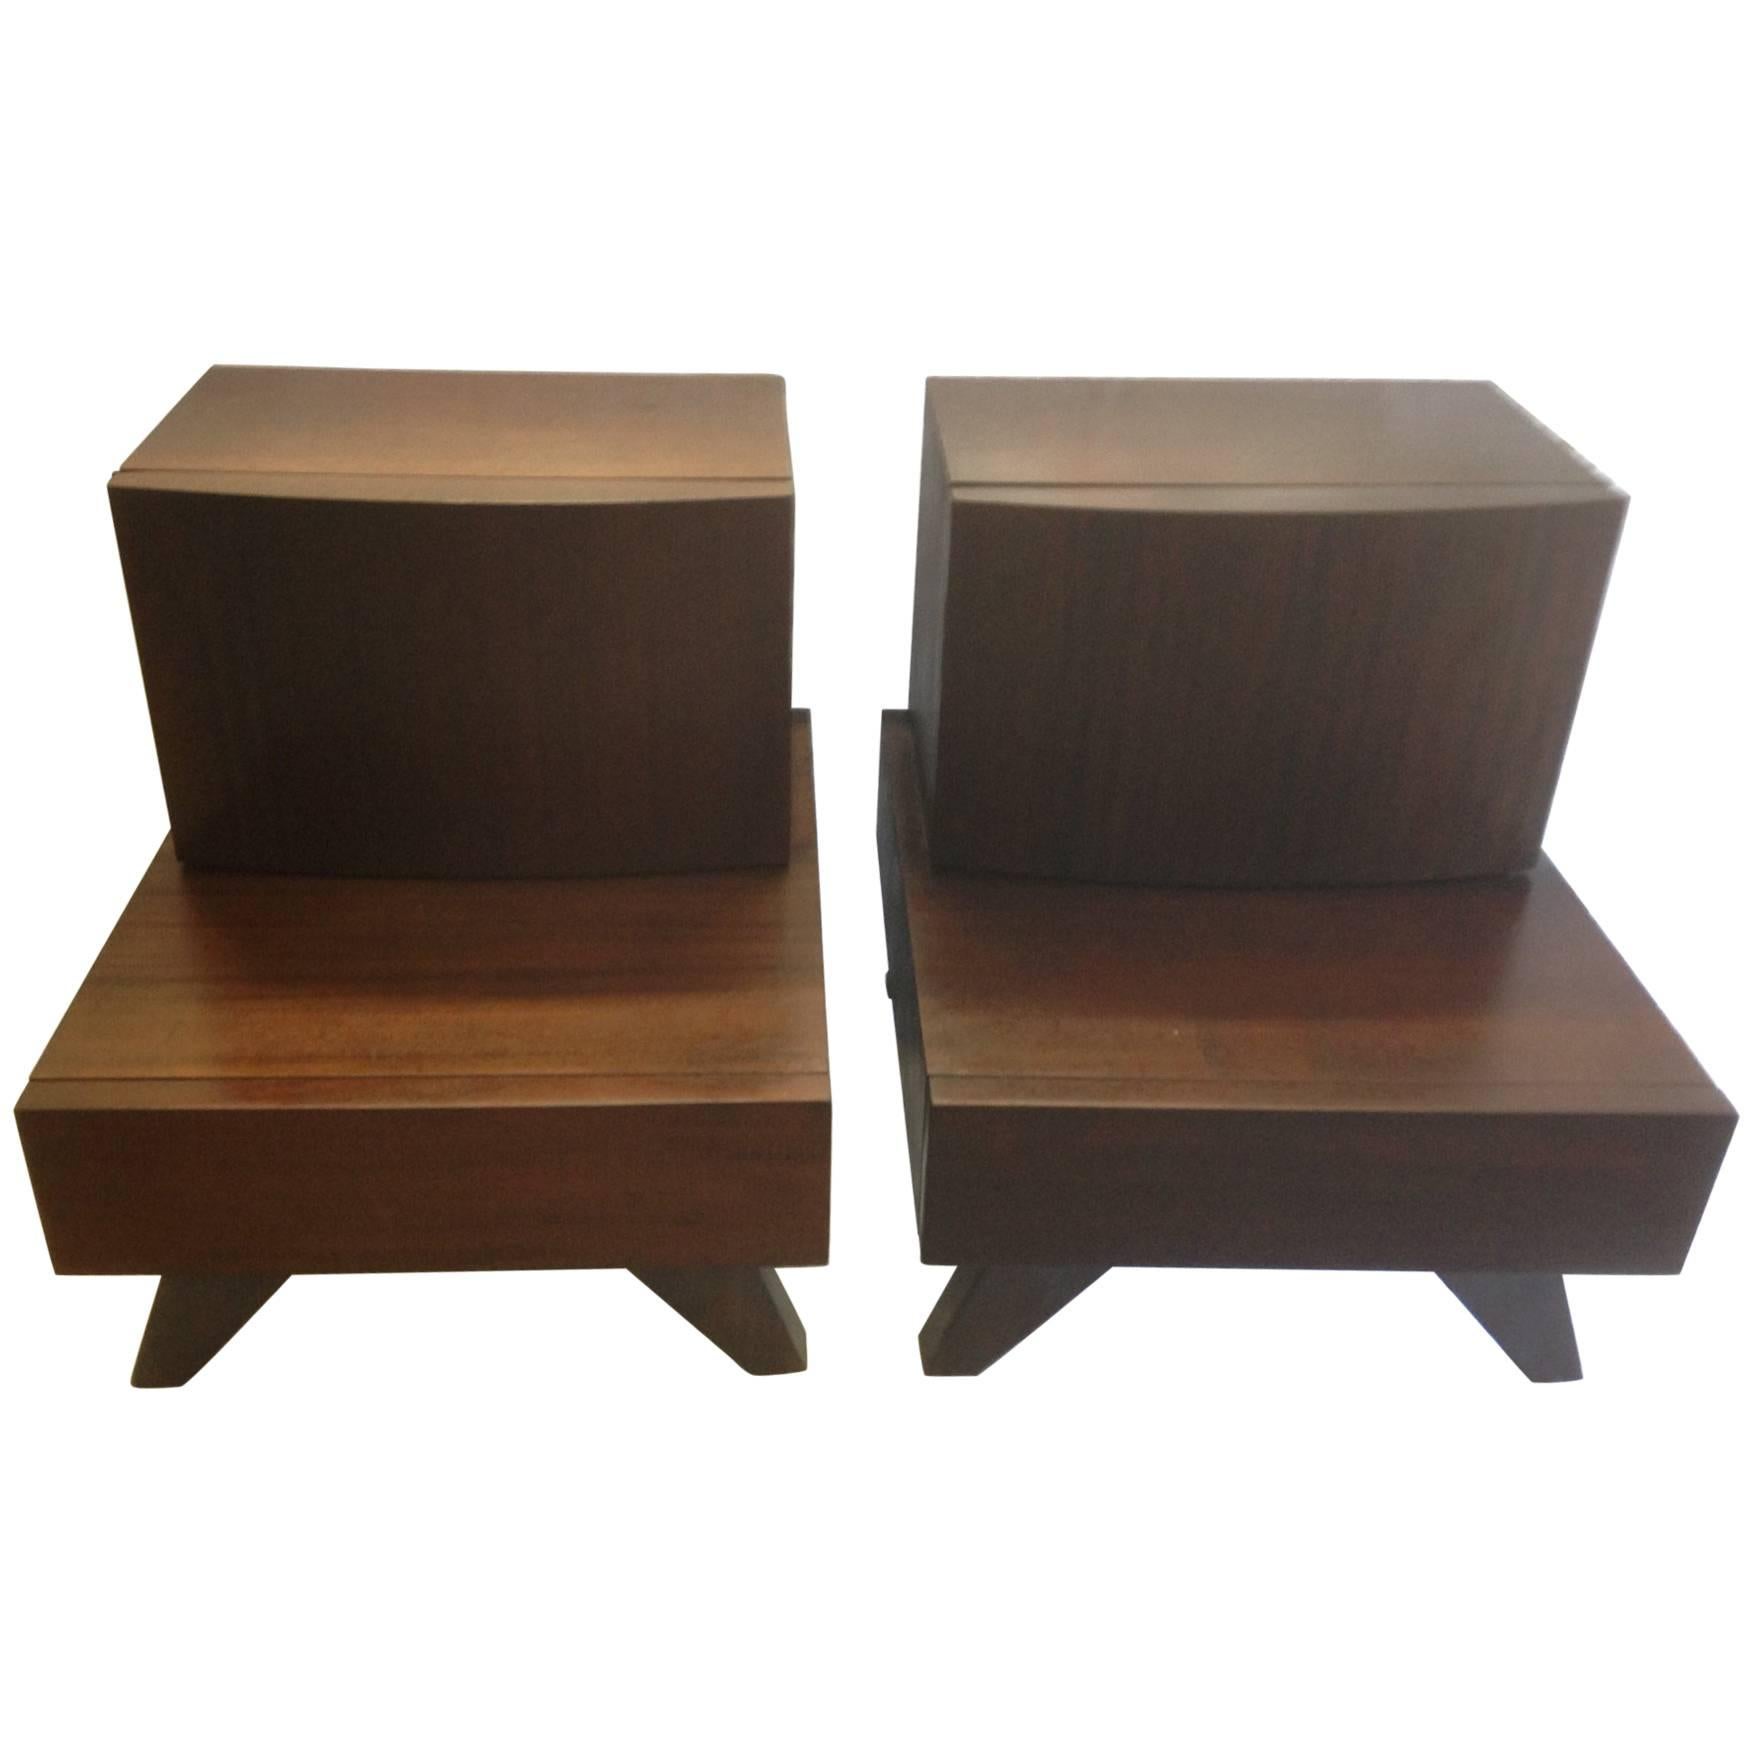 Pair of Mid-Century Wooden Bedside/End Tables For Sale